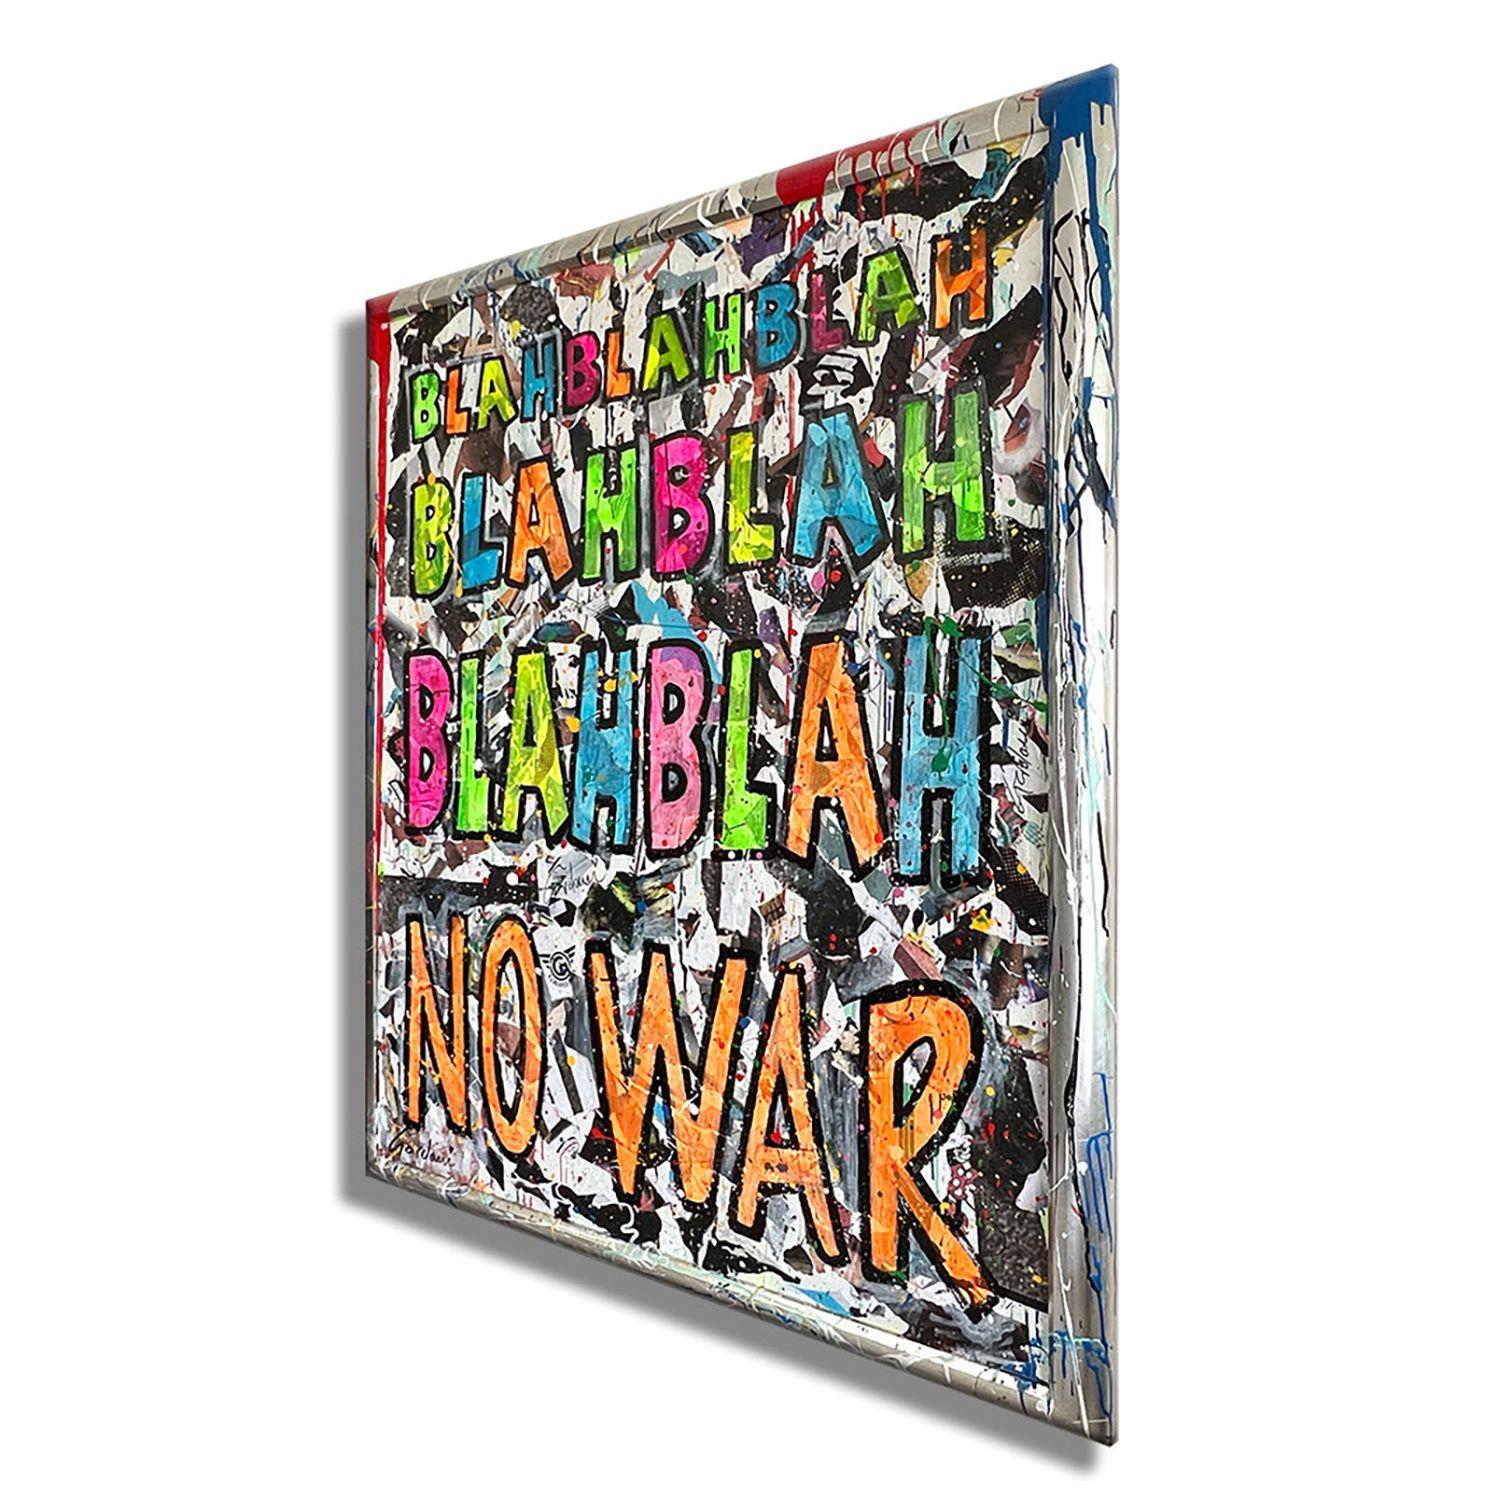 Blah No War â€“ Original Painting on Canvas, Painting, Acrylic on Canvas For Sale 2